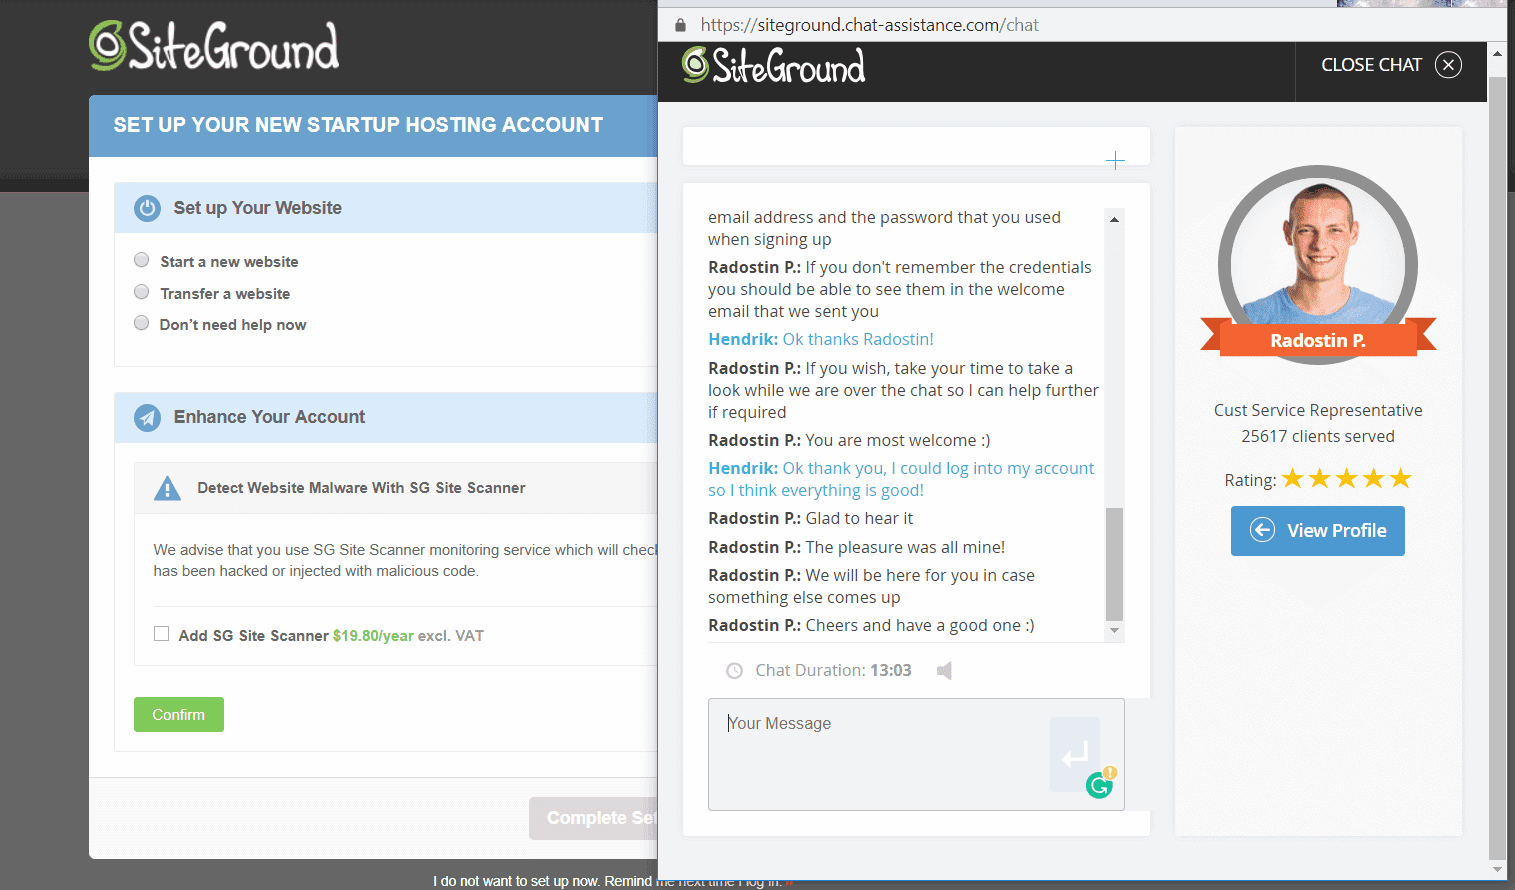 SiteGround's live chat support